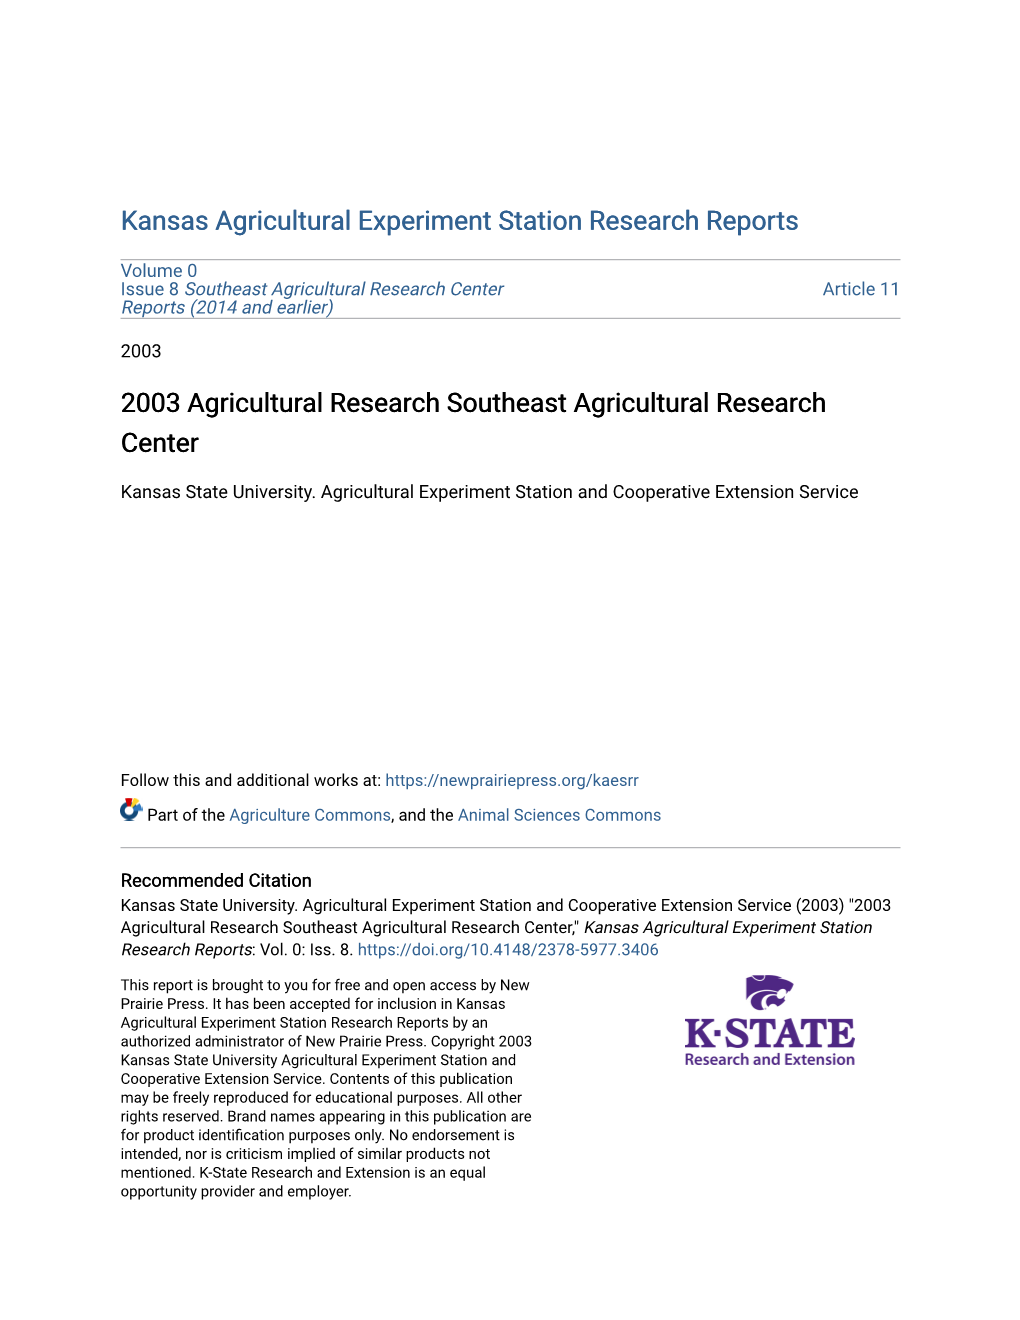 2003 Agricultural Research Southeast Agricultural Research Center